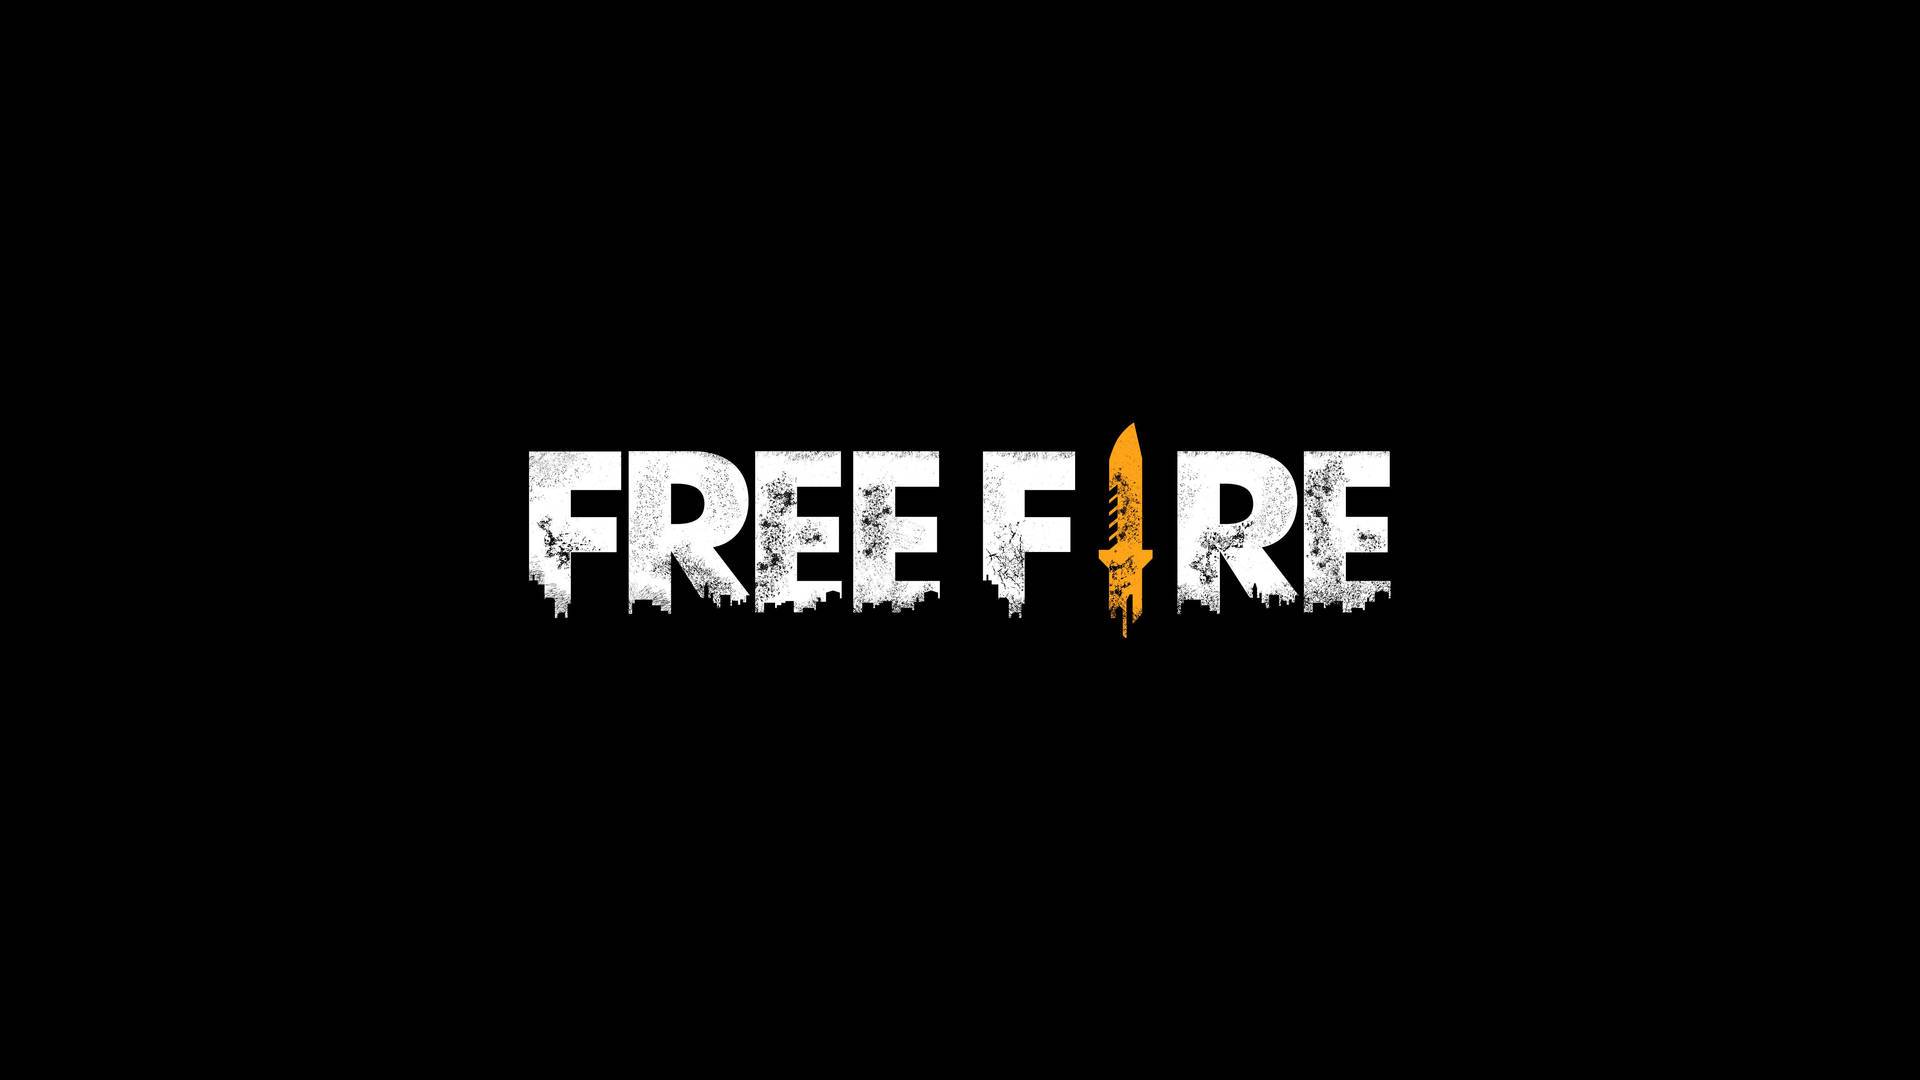 100+] Free Fire Logo Wallpapers | Wallpapers.com